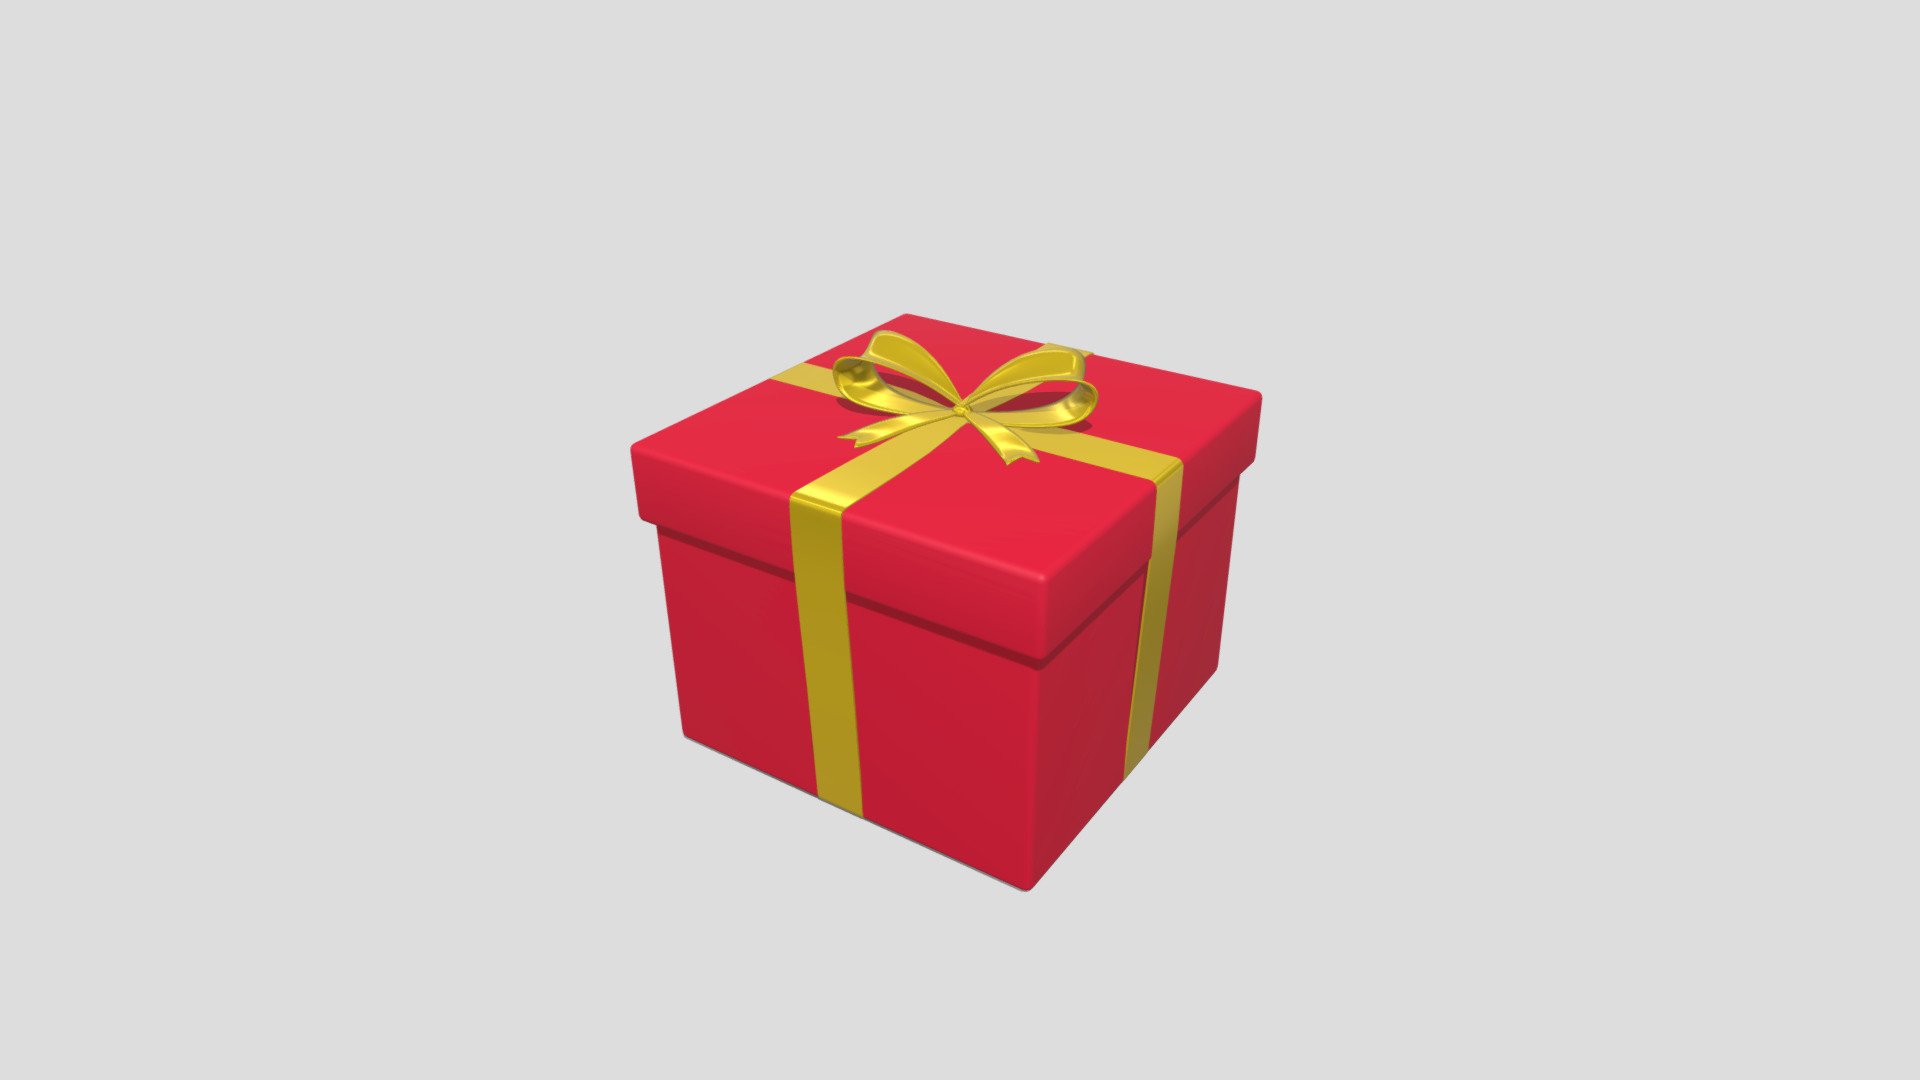 low poly 3d model of wrapped gift box - Gift box - Buy Royalty Free 3D model by assetfactory 3d model